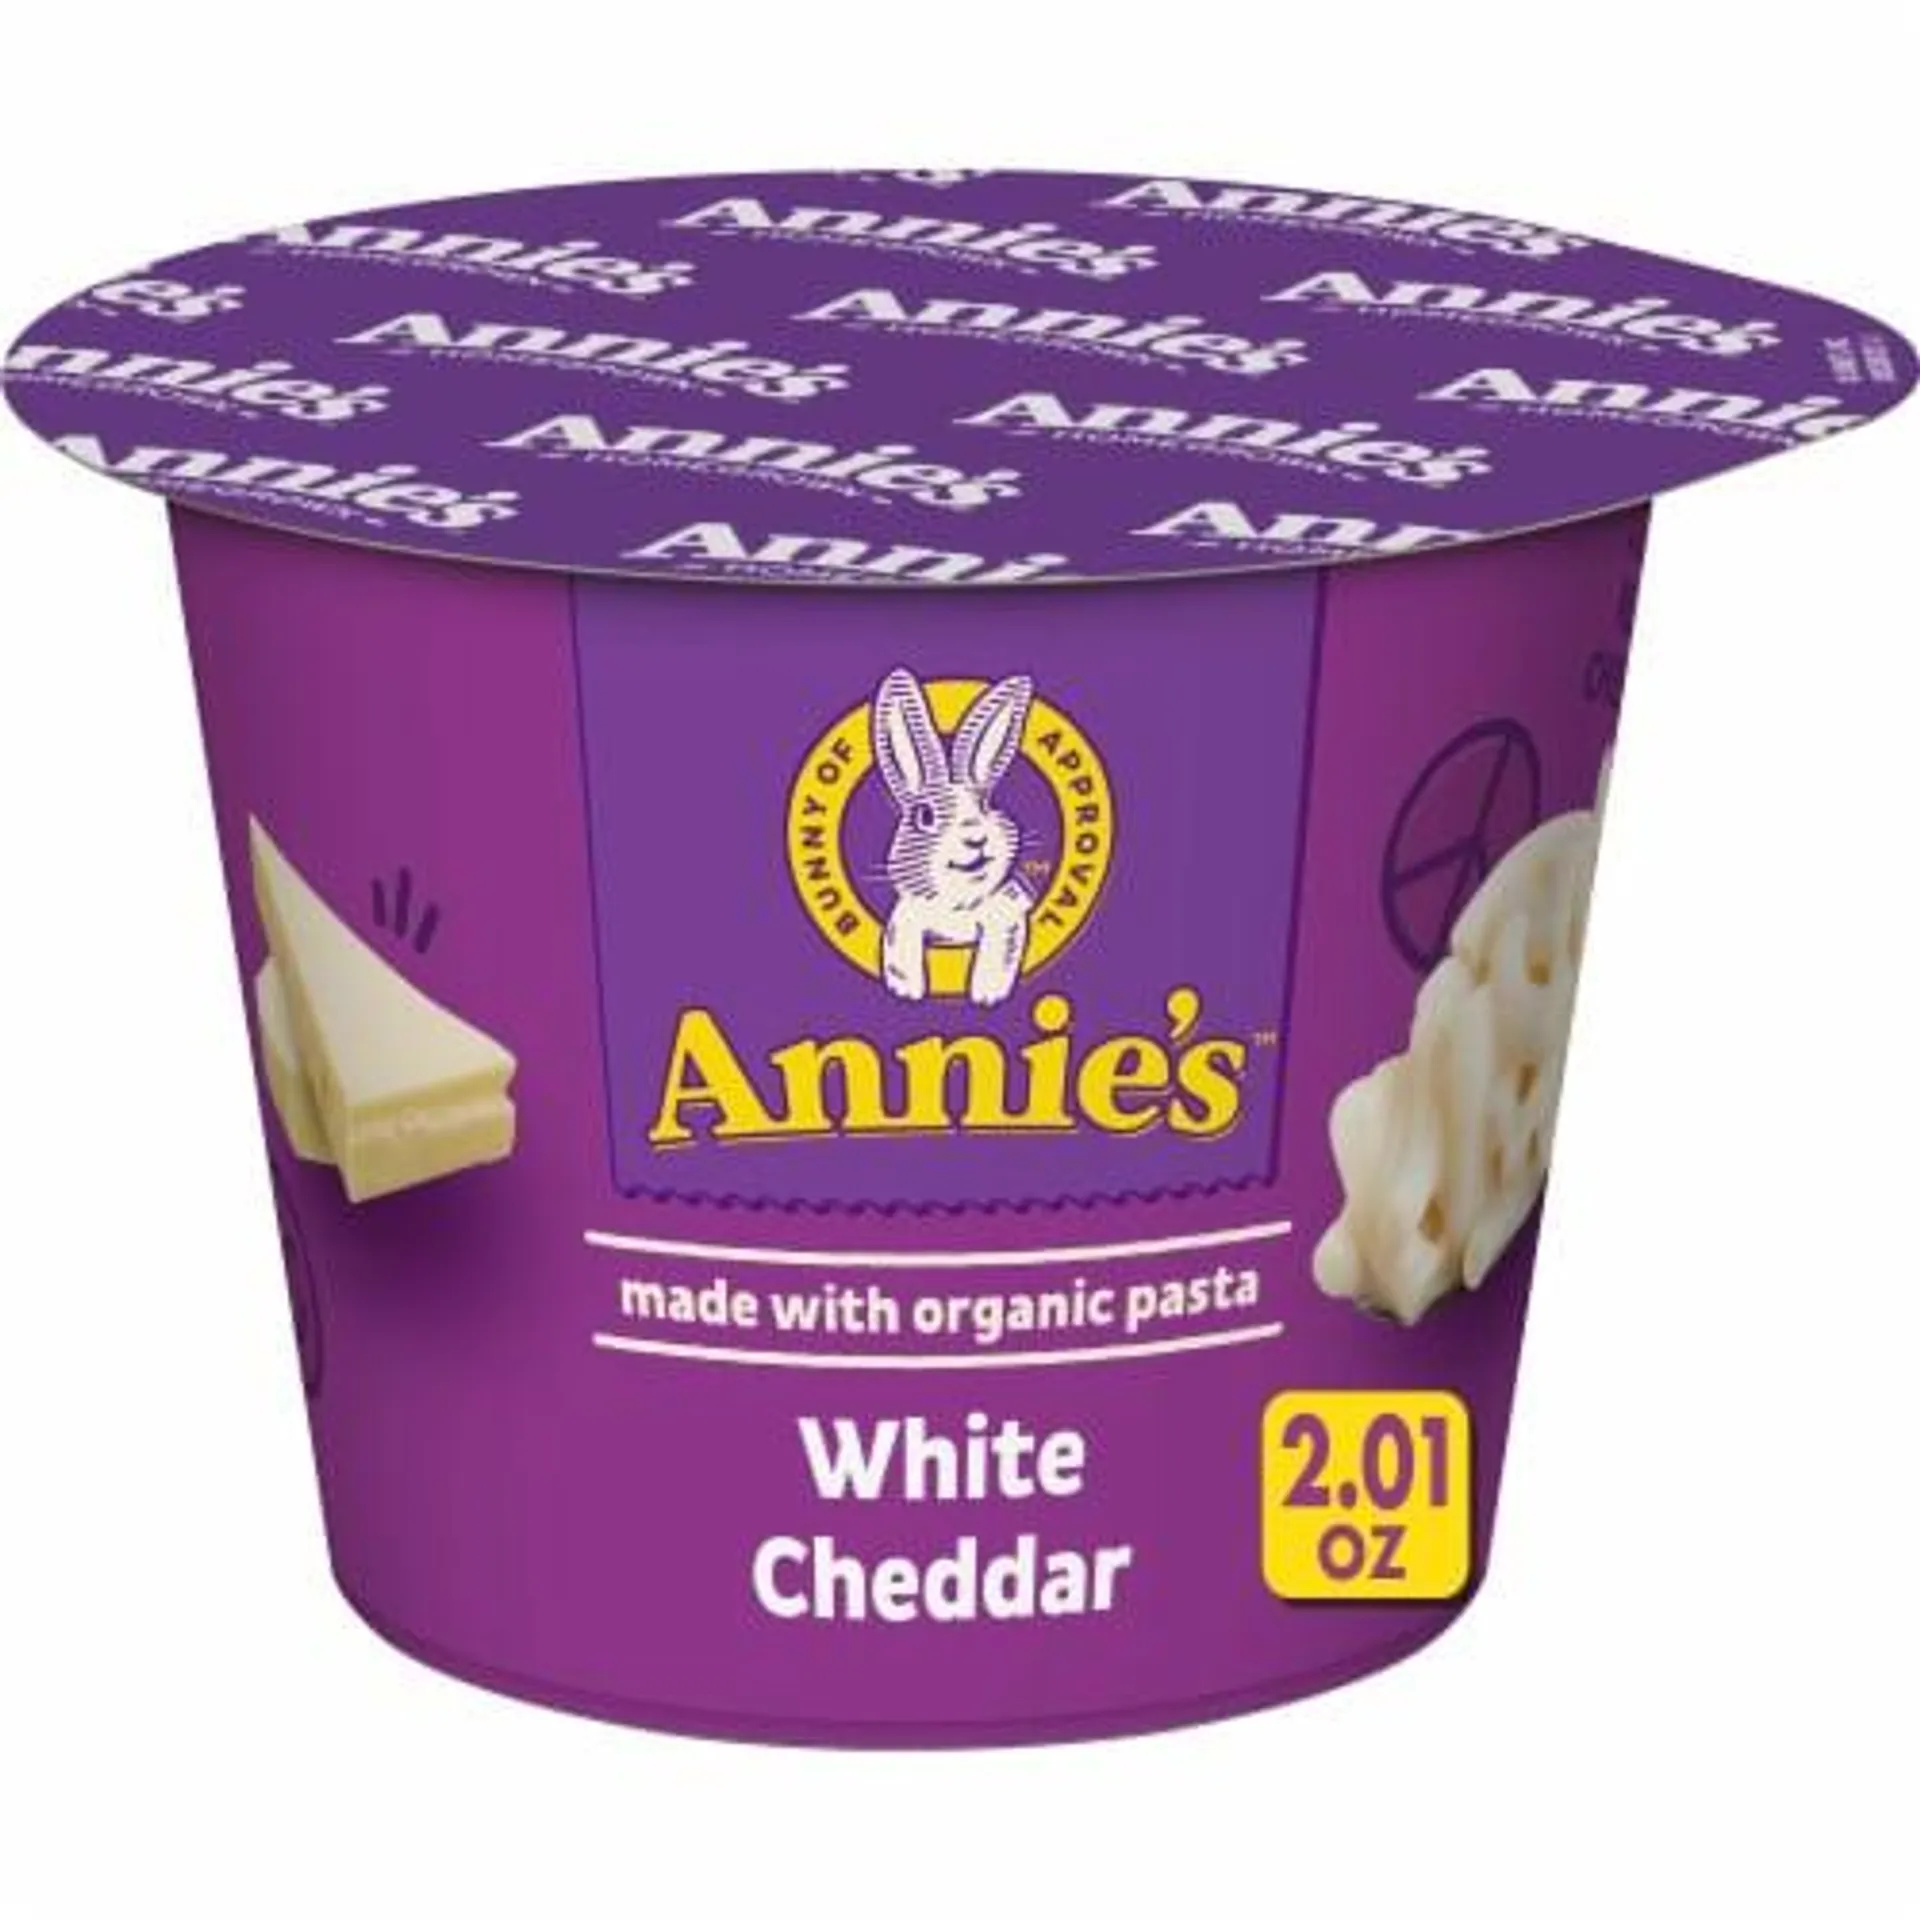 Annie's Organic White Cheddar Microwave Mac and Cheese Cup